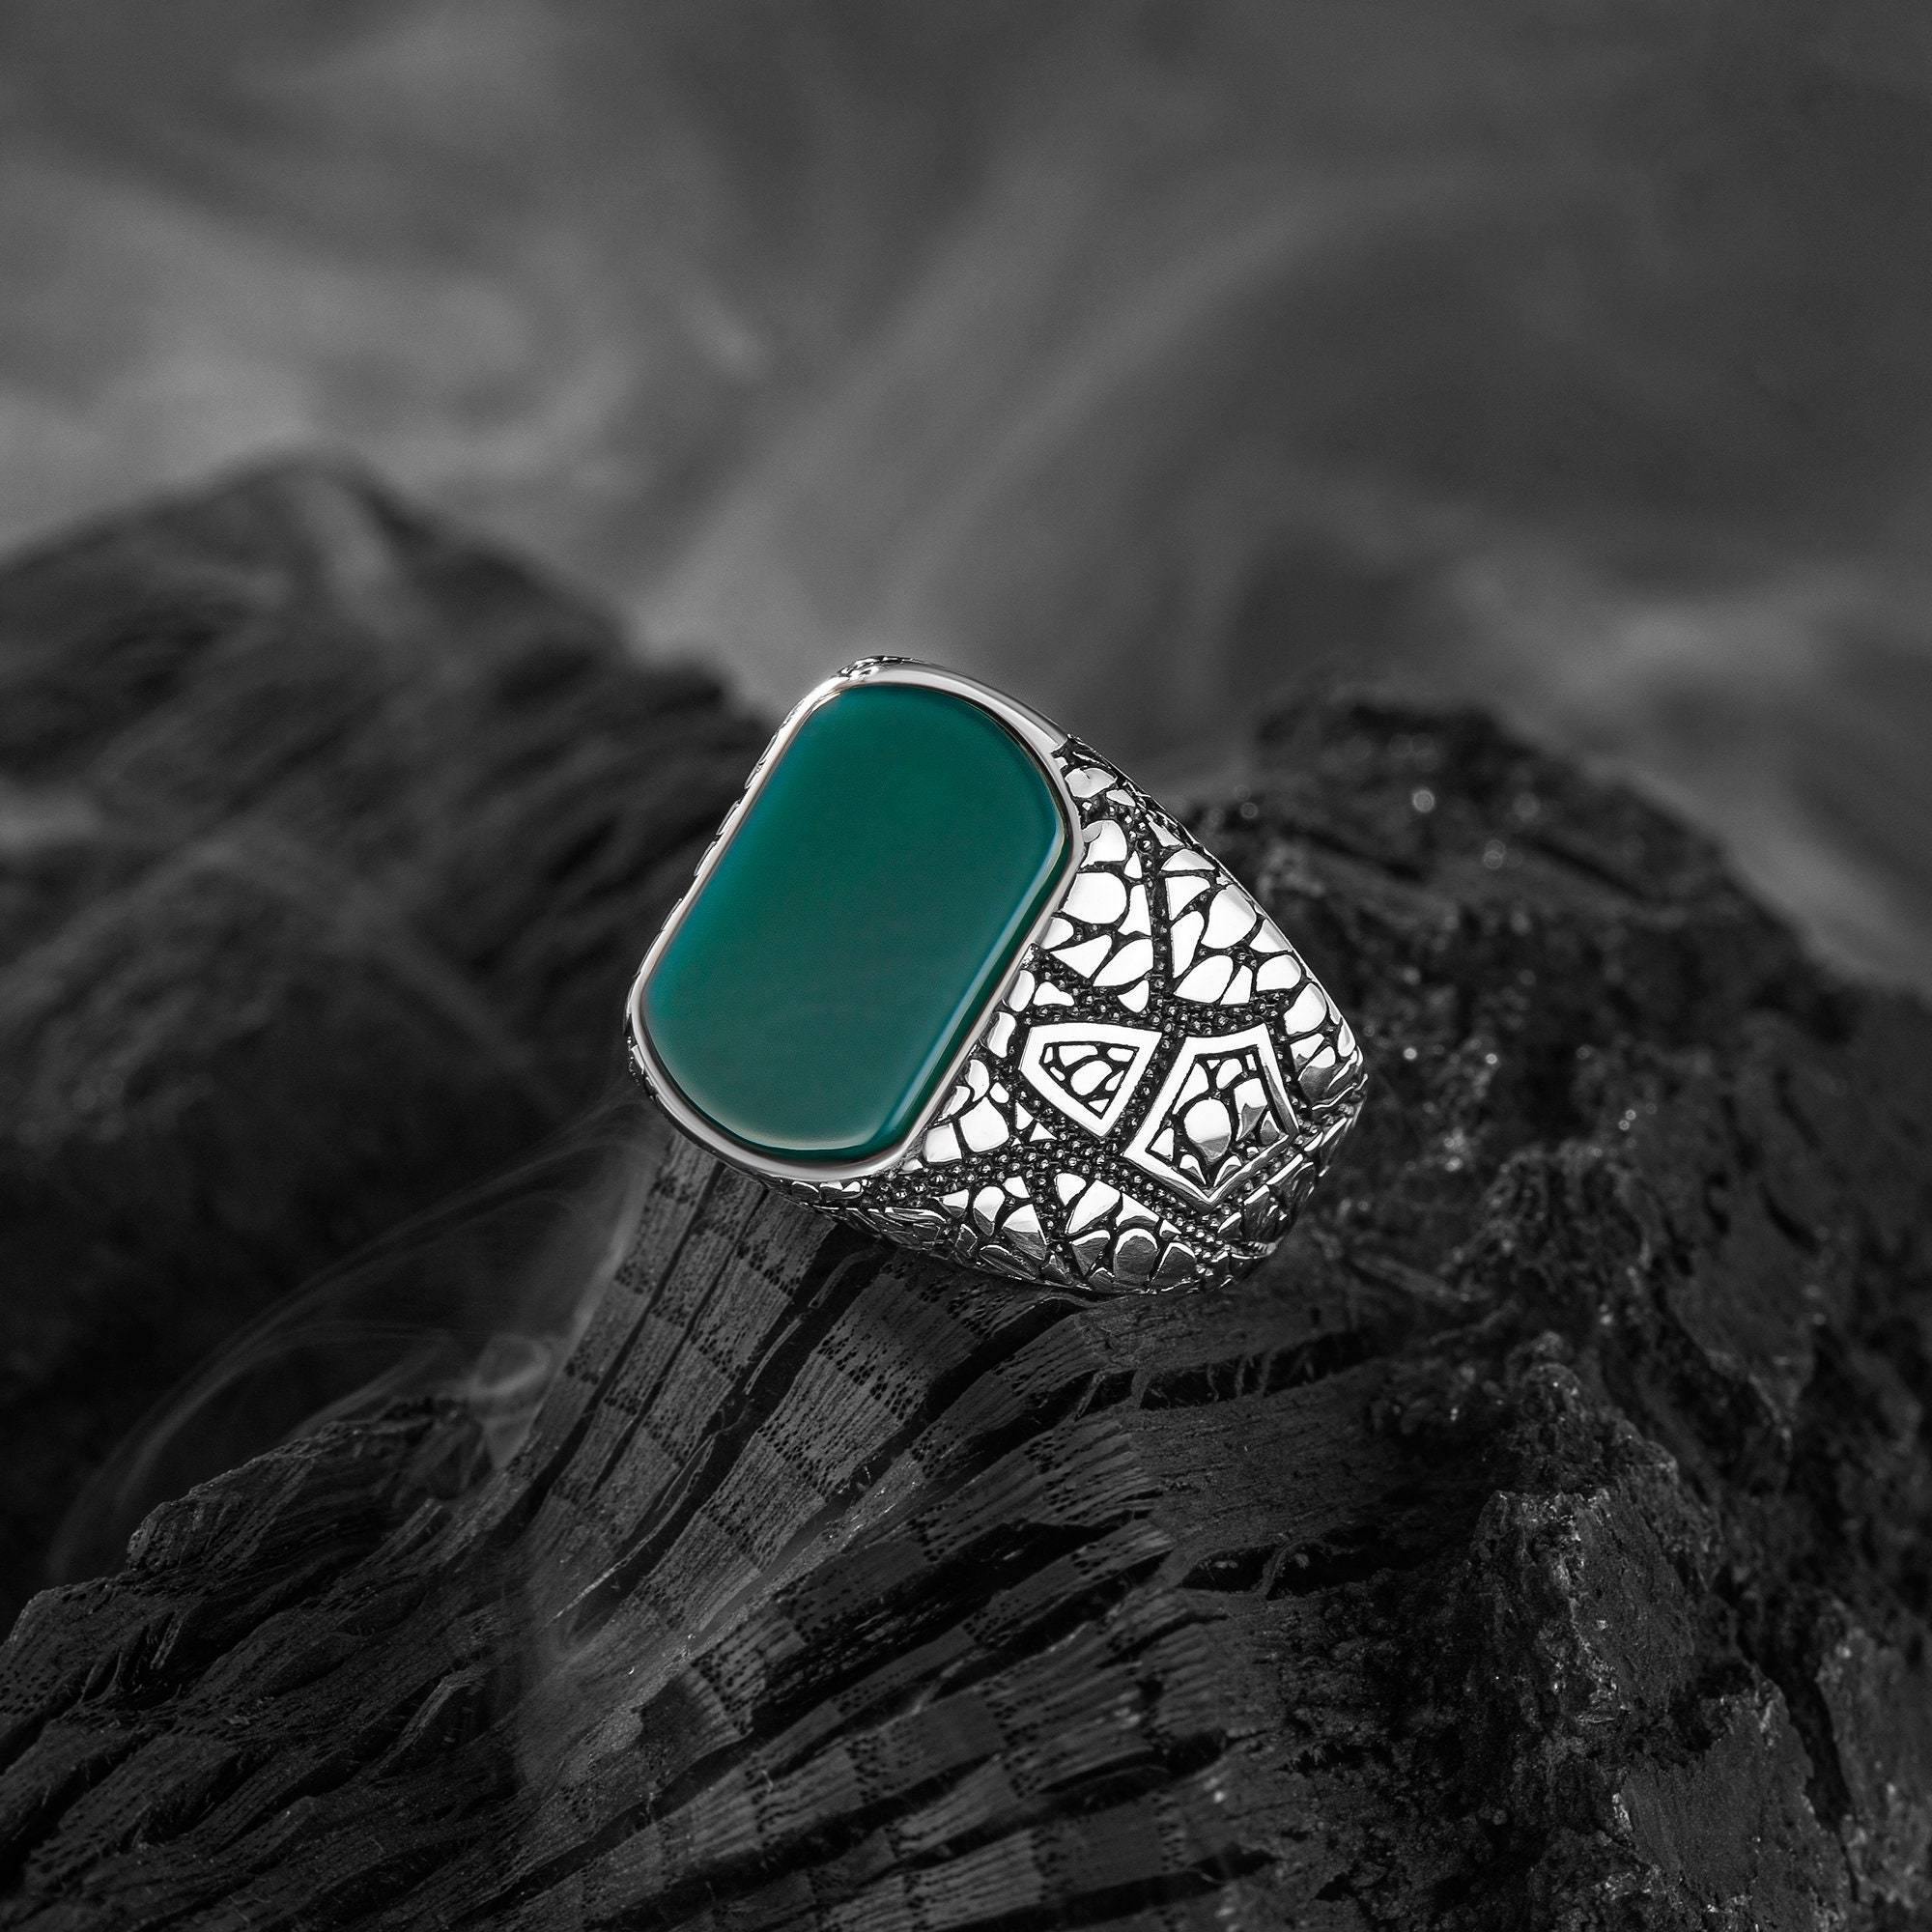 Personalizable Green Agate Men Ring, Engraved Handmade Silver Ring - OXO SILVER